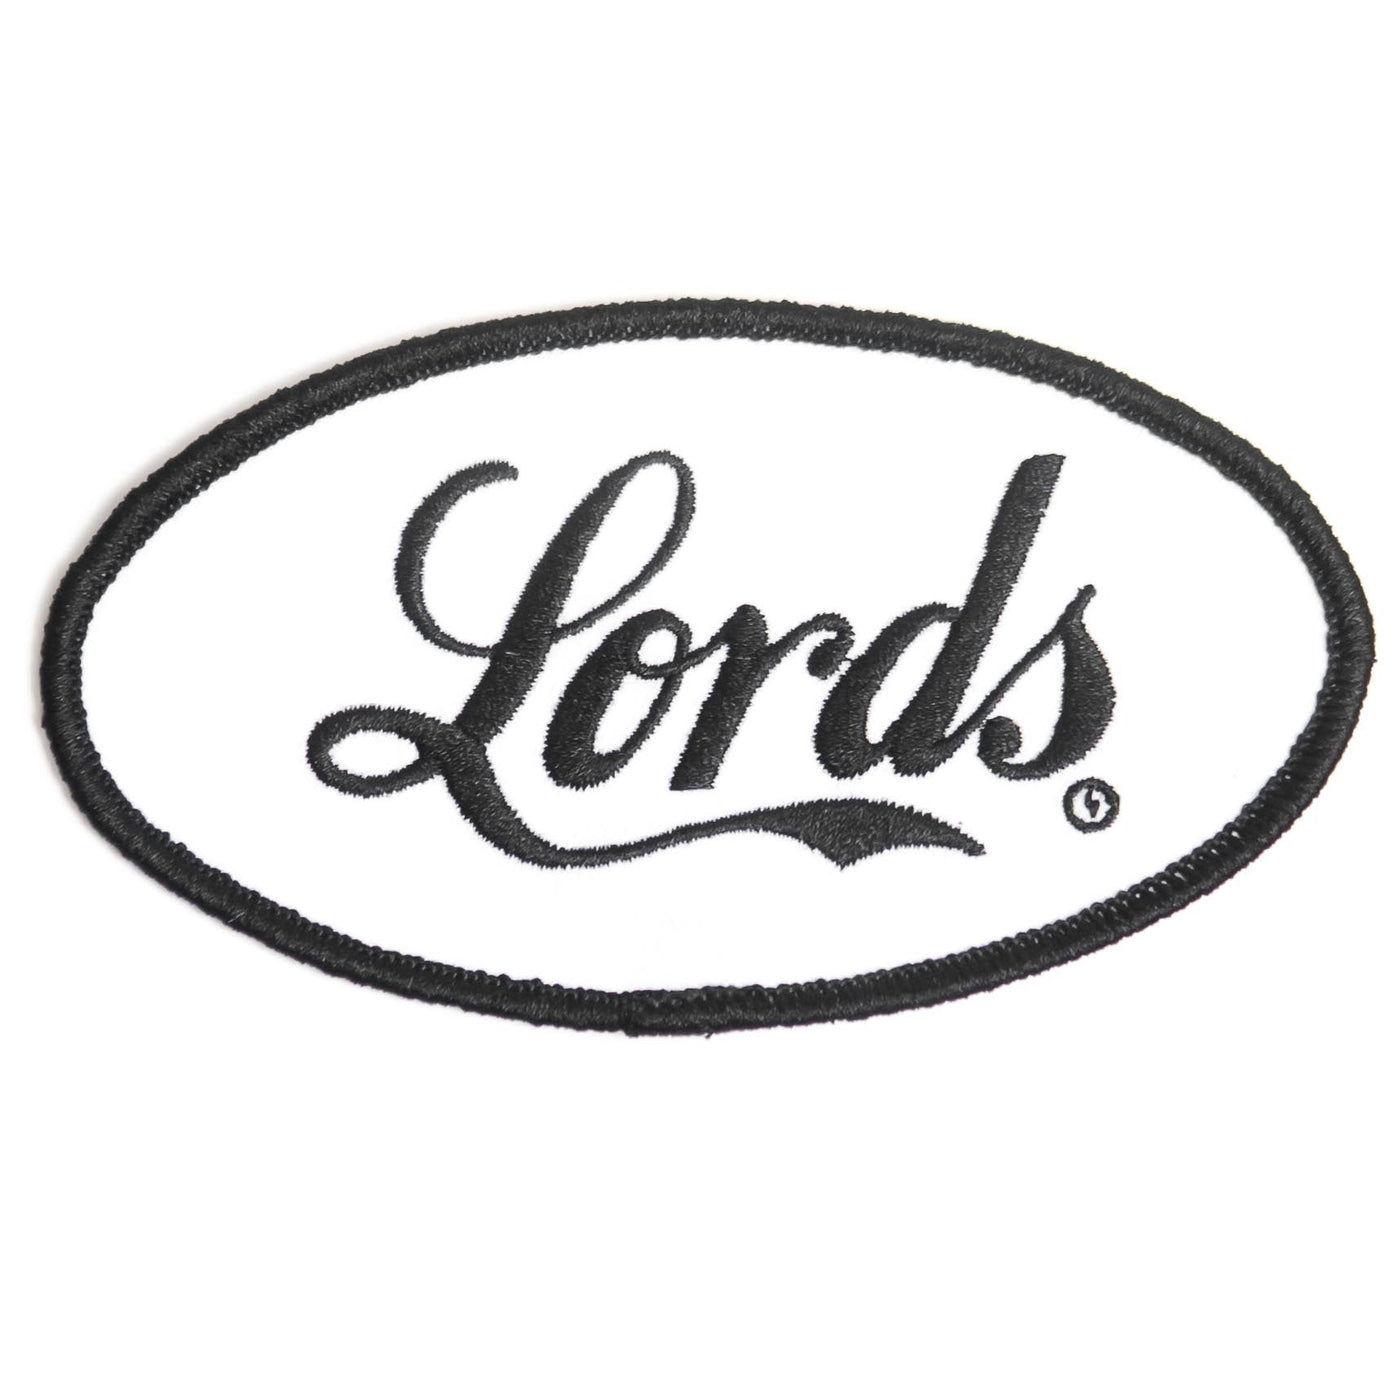 Lords Motors Patch